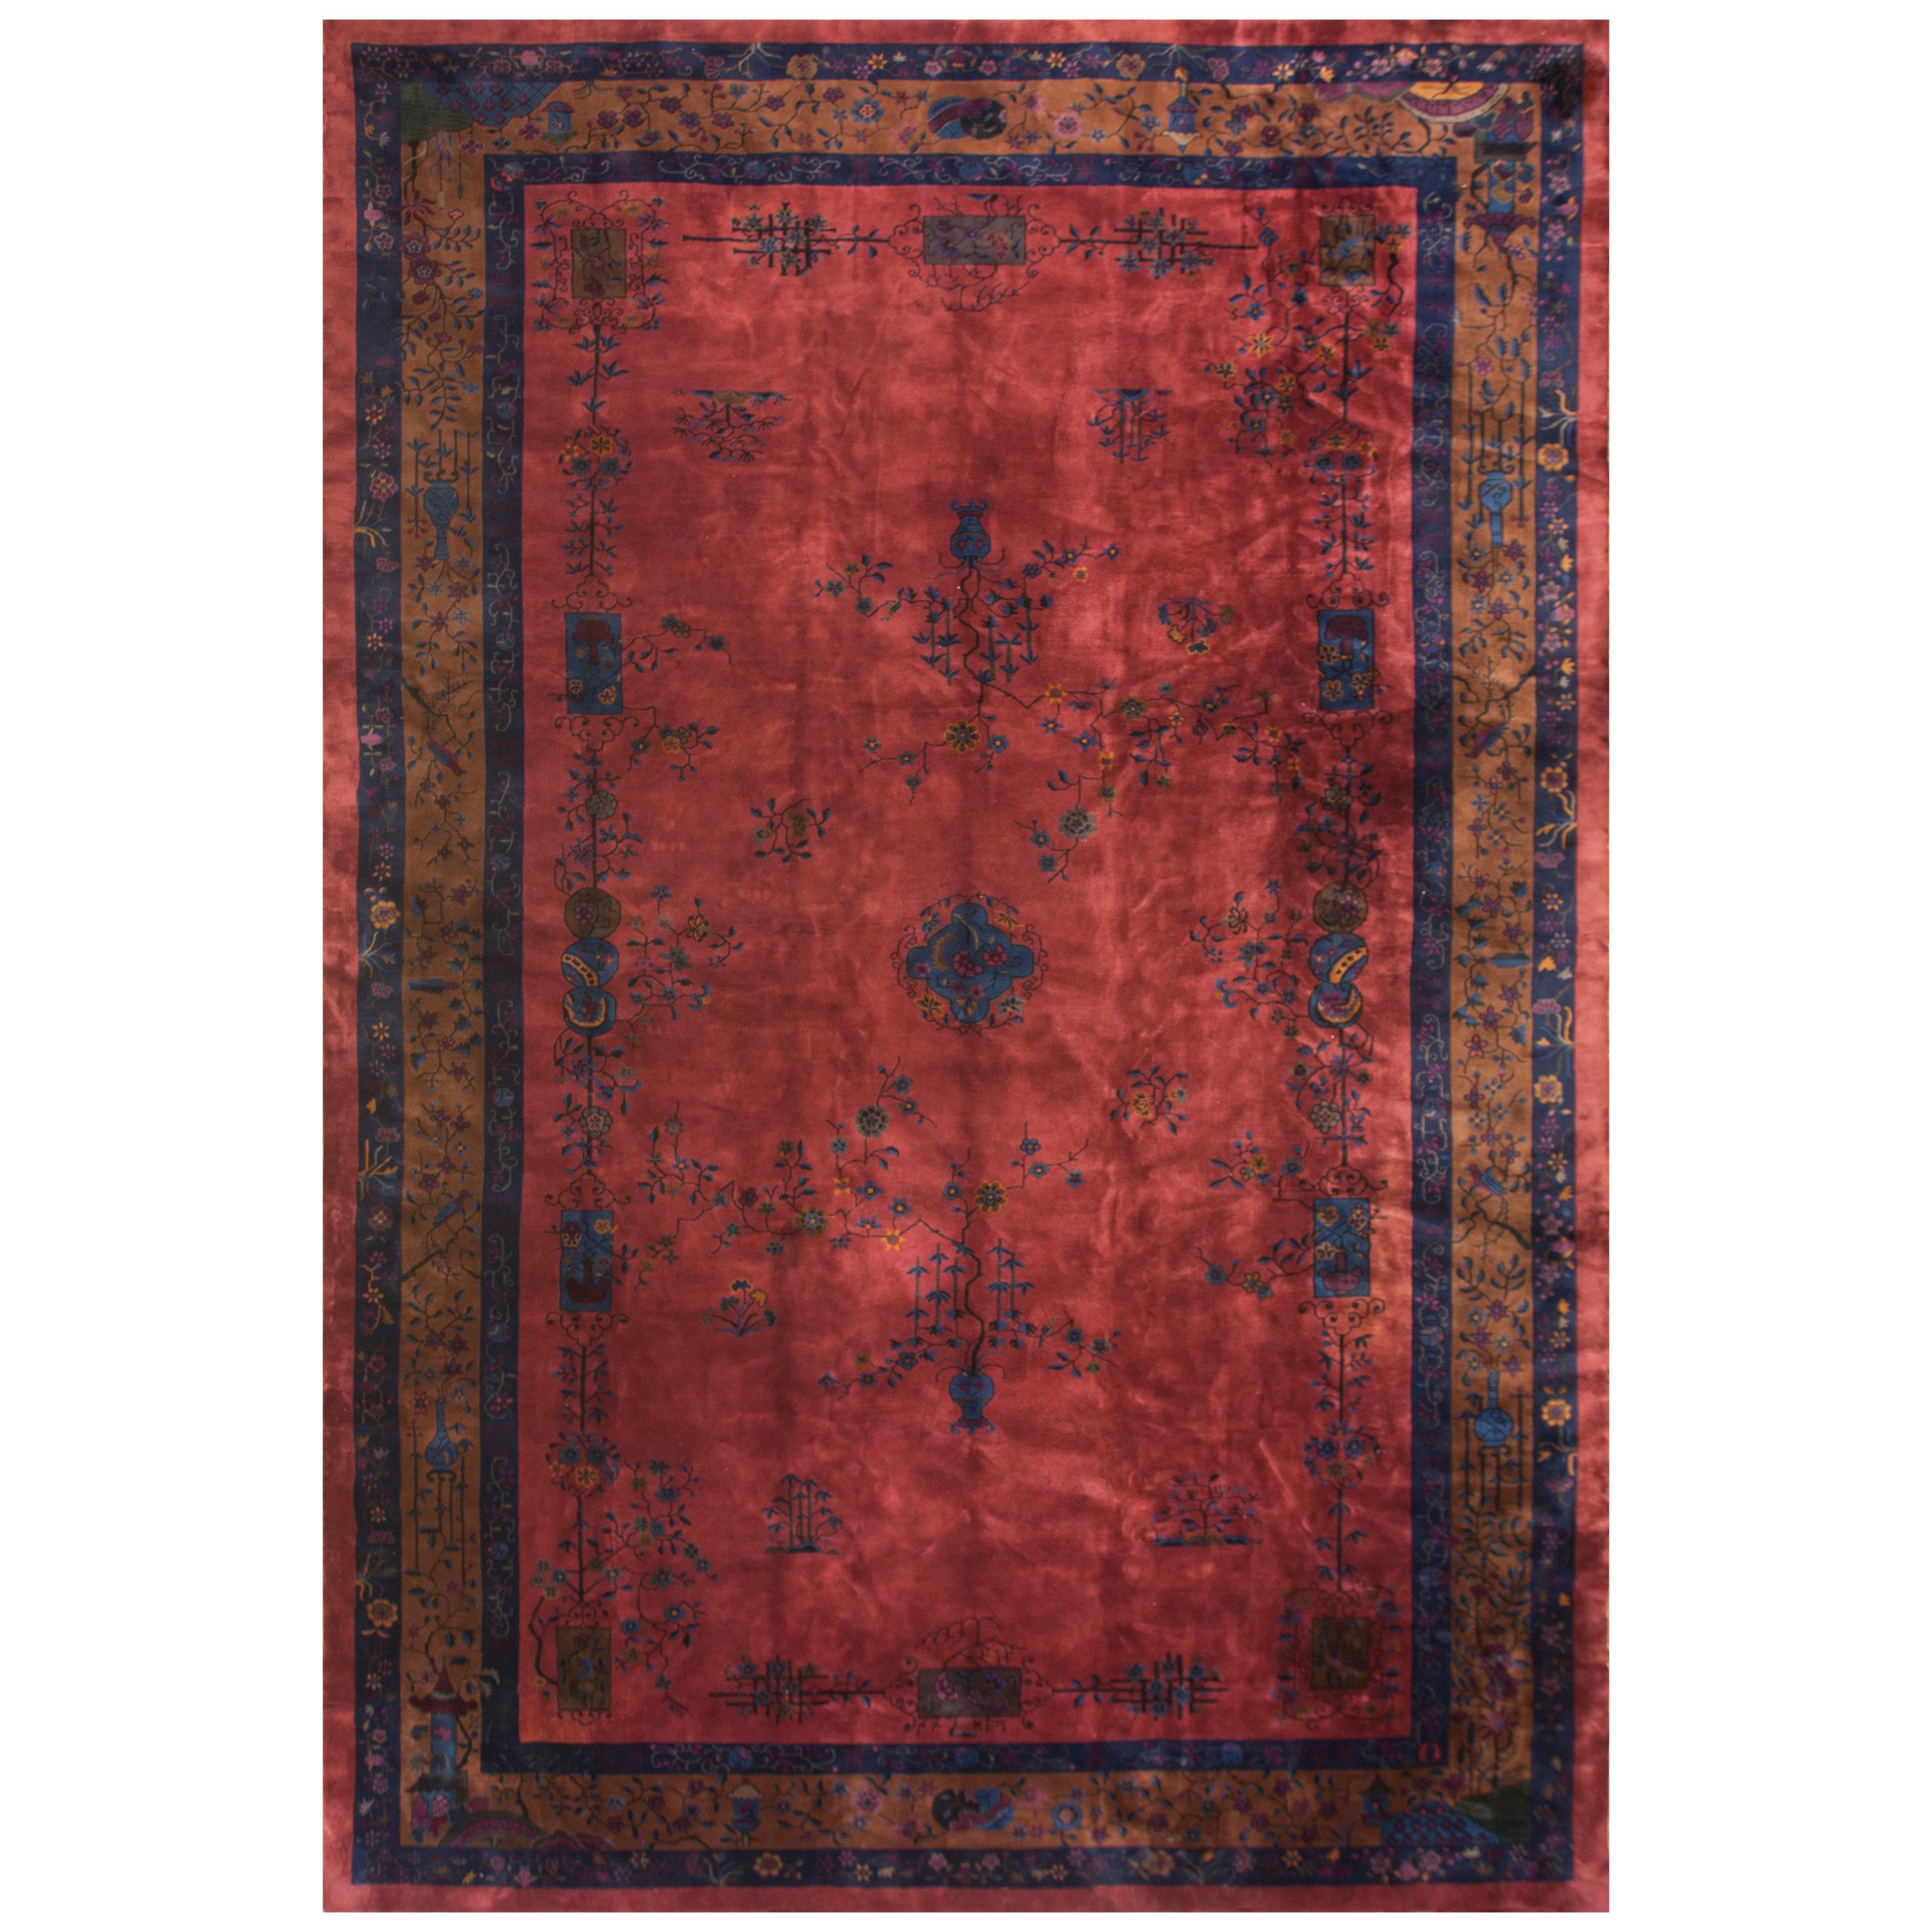 1920s Chinese Art Deco Carpet ( 11'3" x 17'2" - 343 x 523 ) For Sale